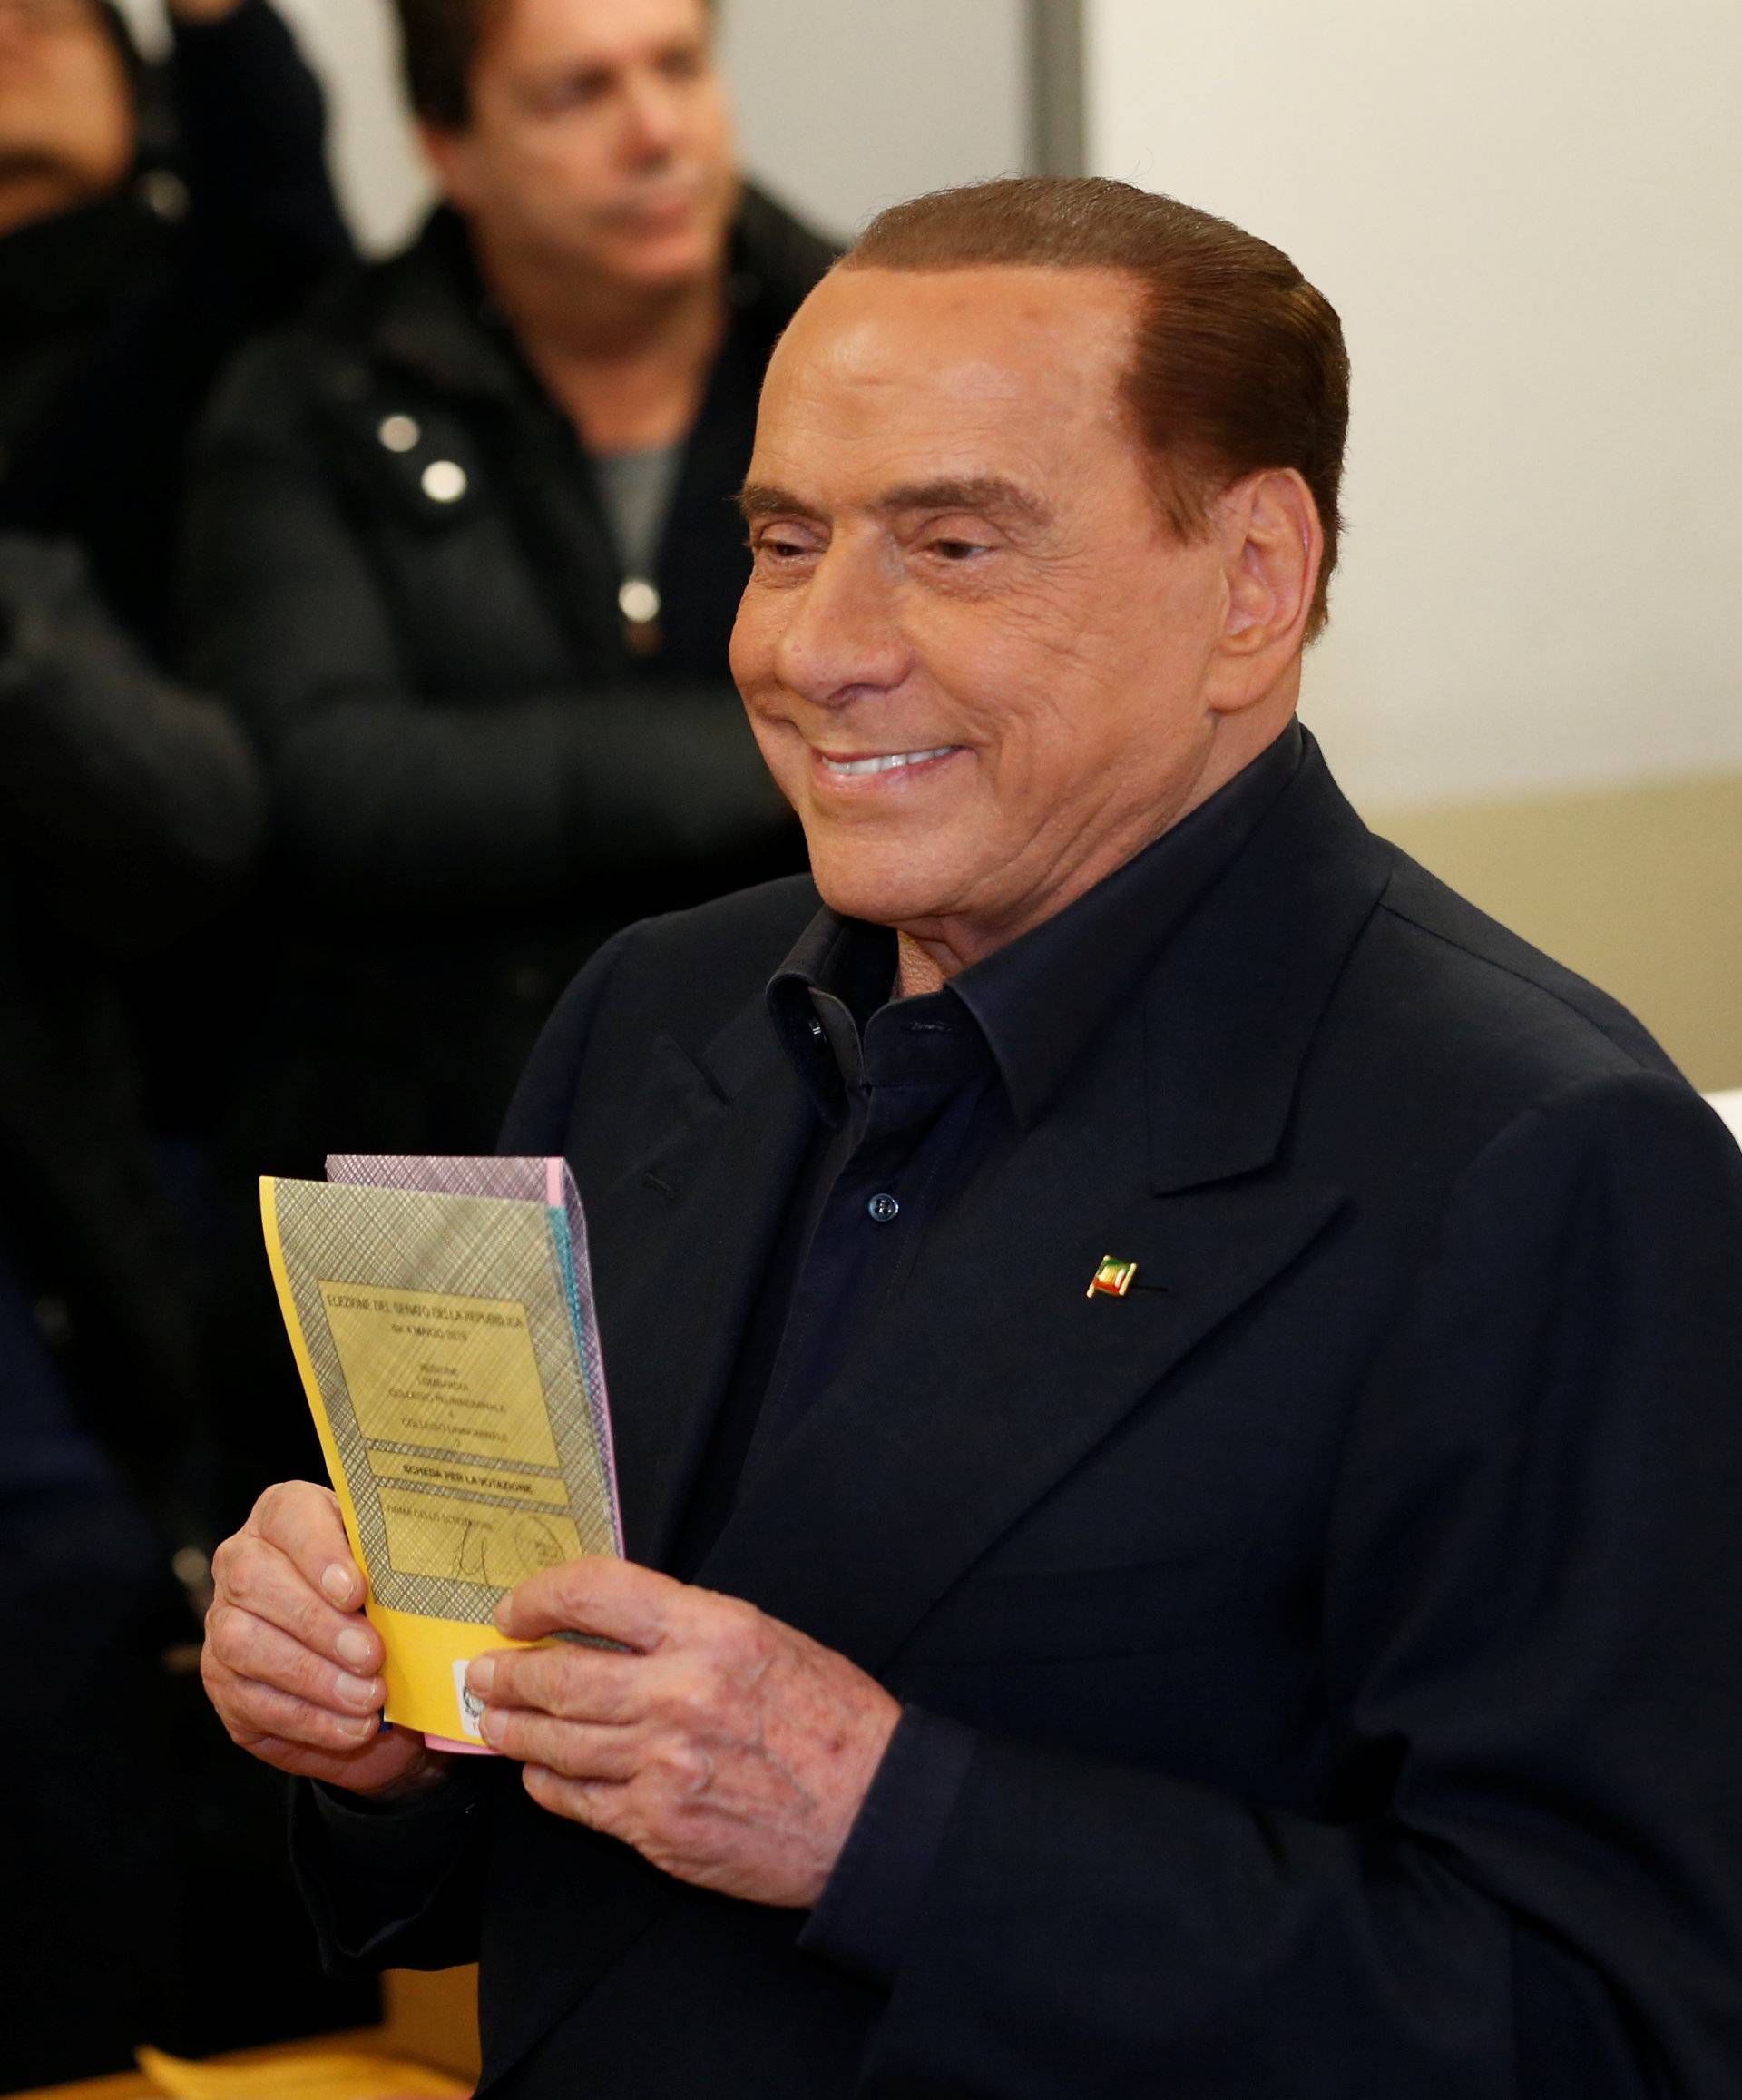 Forza Italia party leader Silvio Berlusconi casts his vote at a polling station in Milan